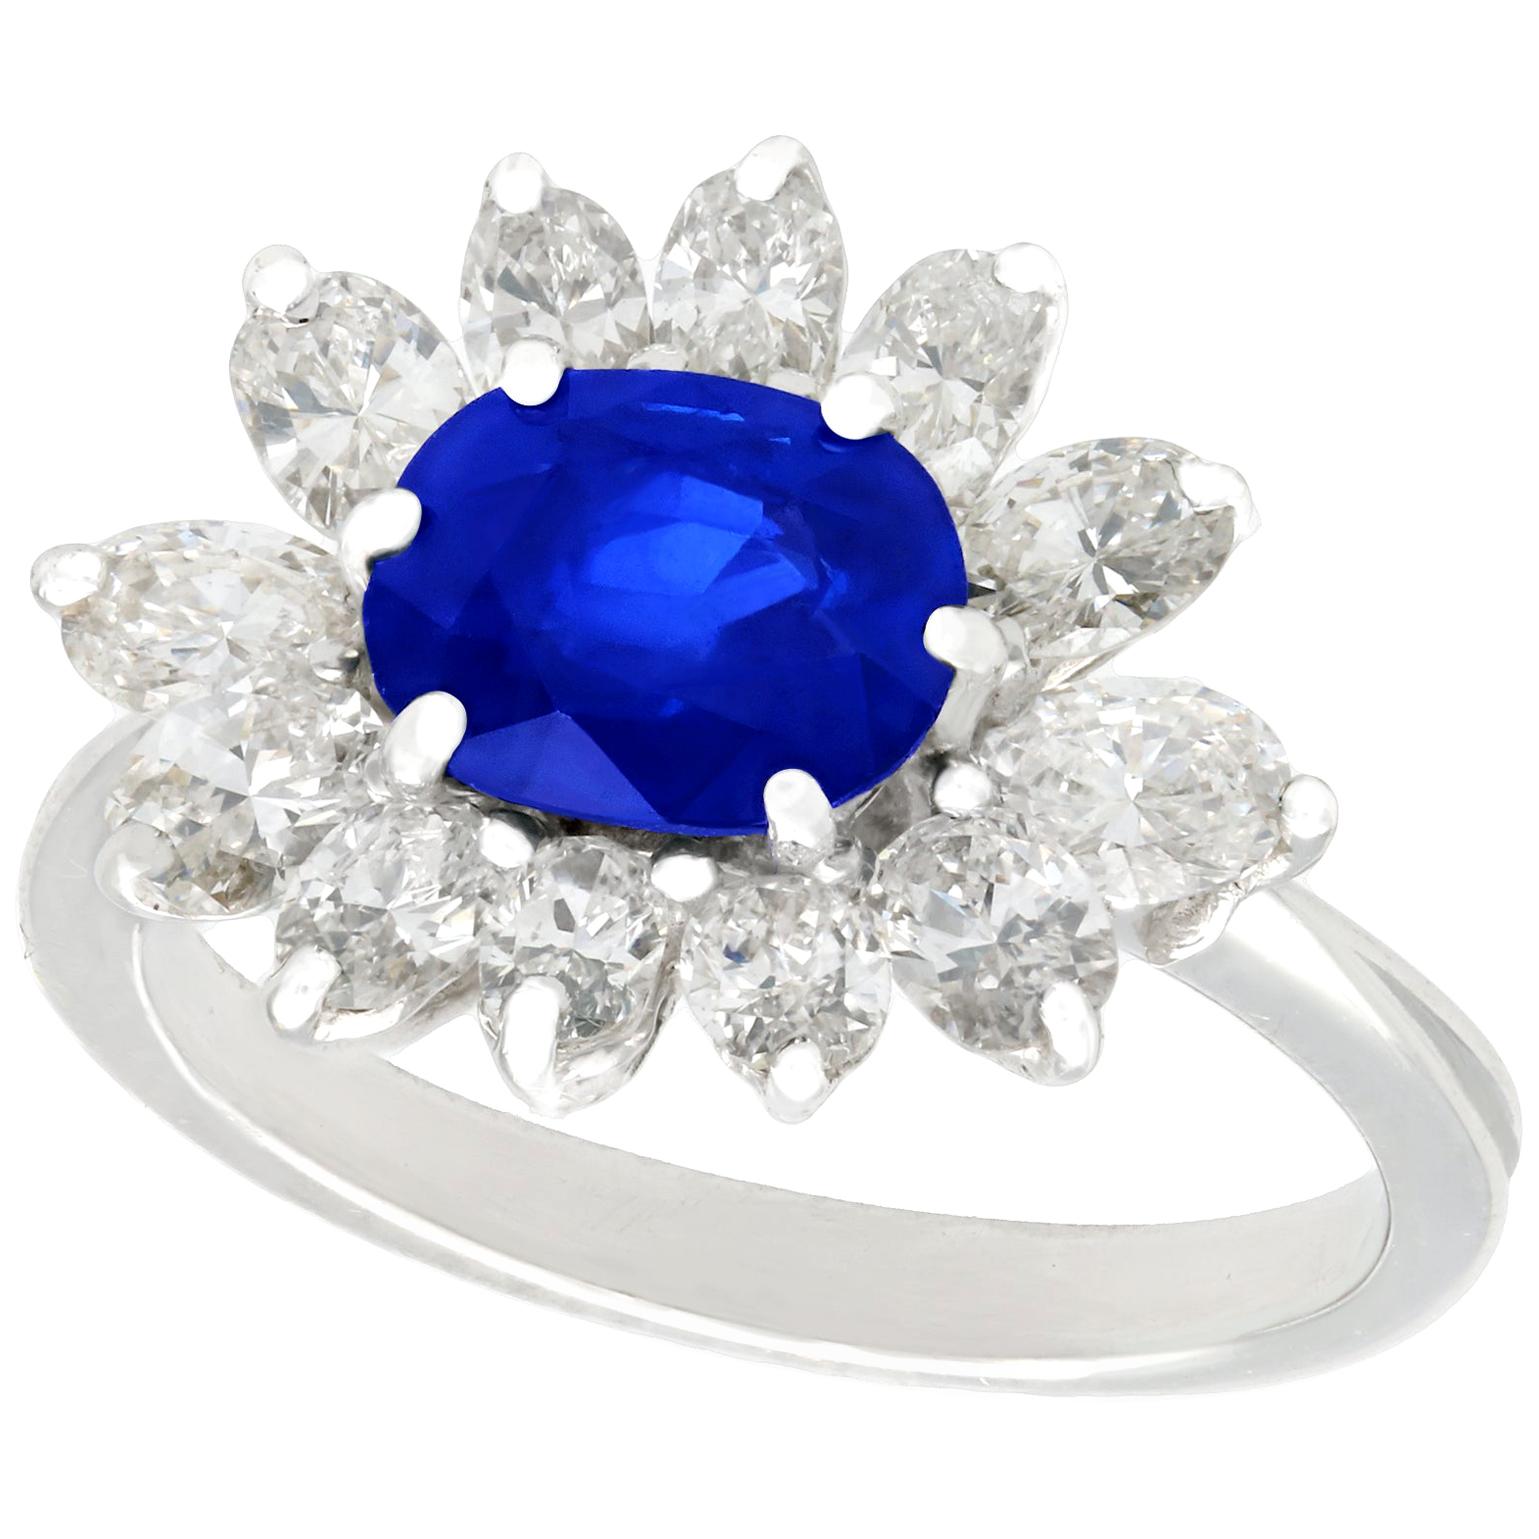 1970s 1.85 Carat Sapphire and 1.56 Carat Diamond White Gold Cocktail Ring